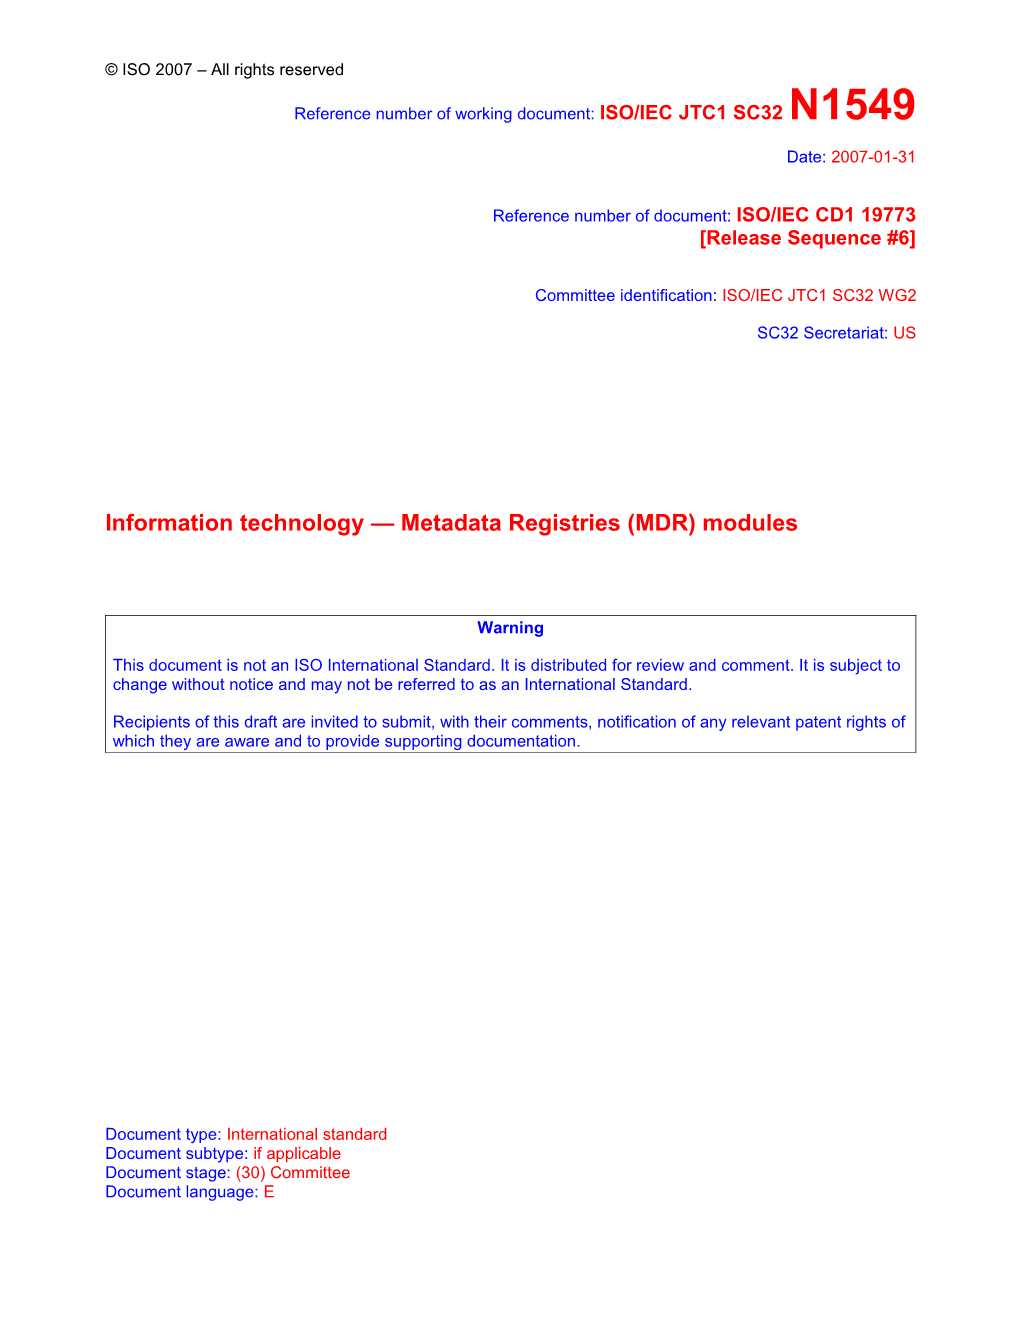 CD1 Text For: ISO/IEC 19773 Information Technology Metadata Registries (MDR) Modules